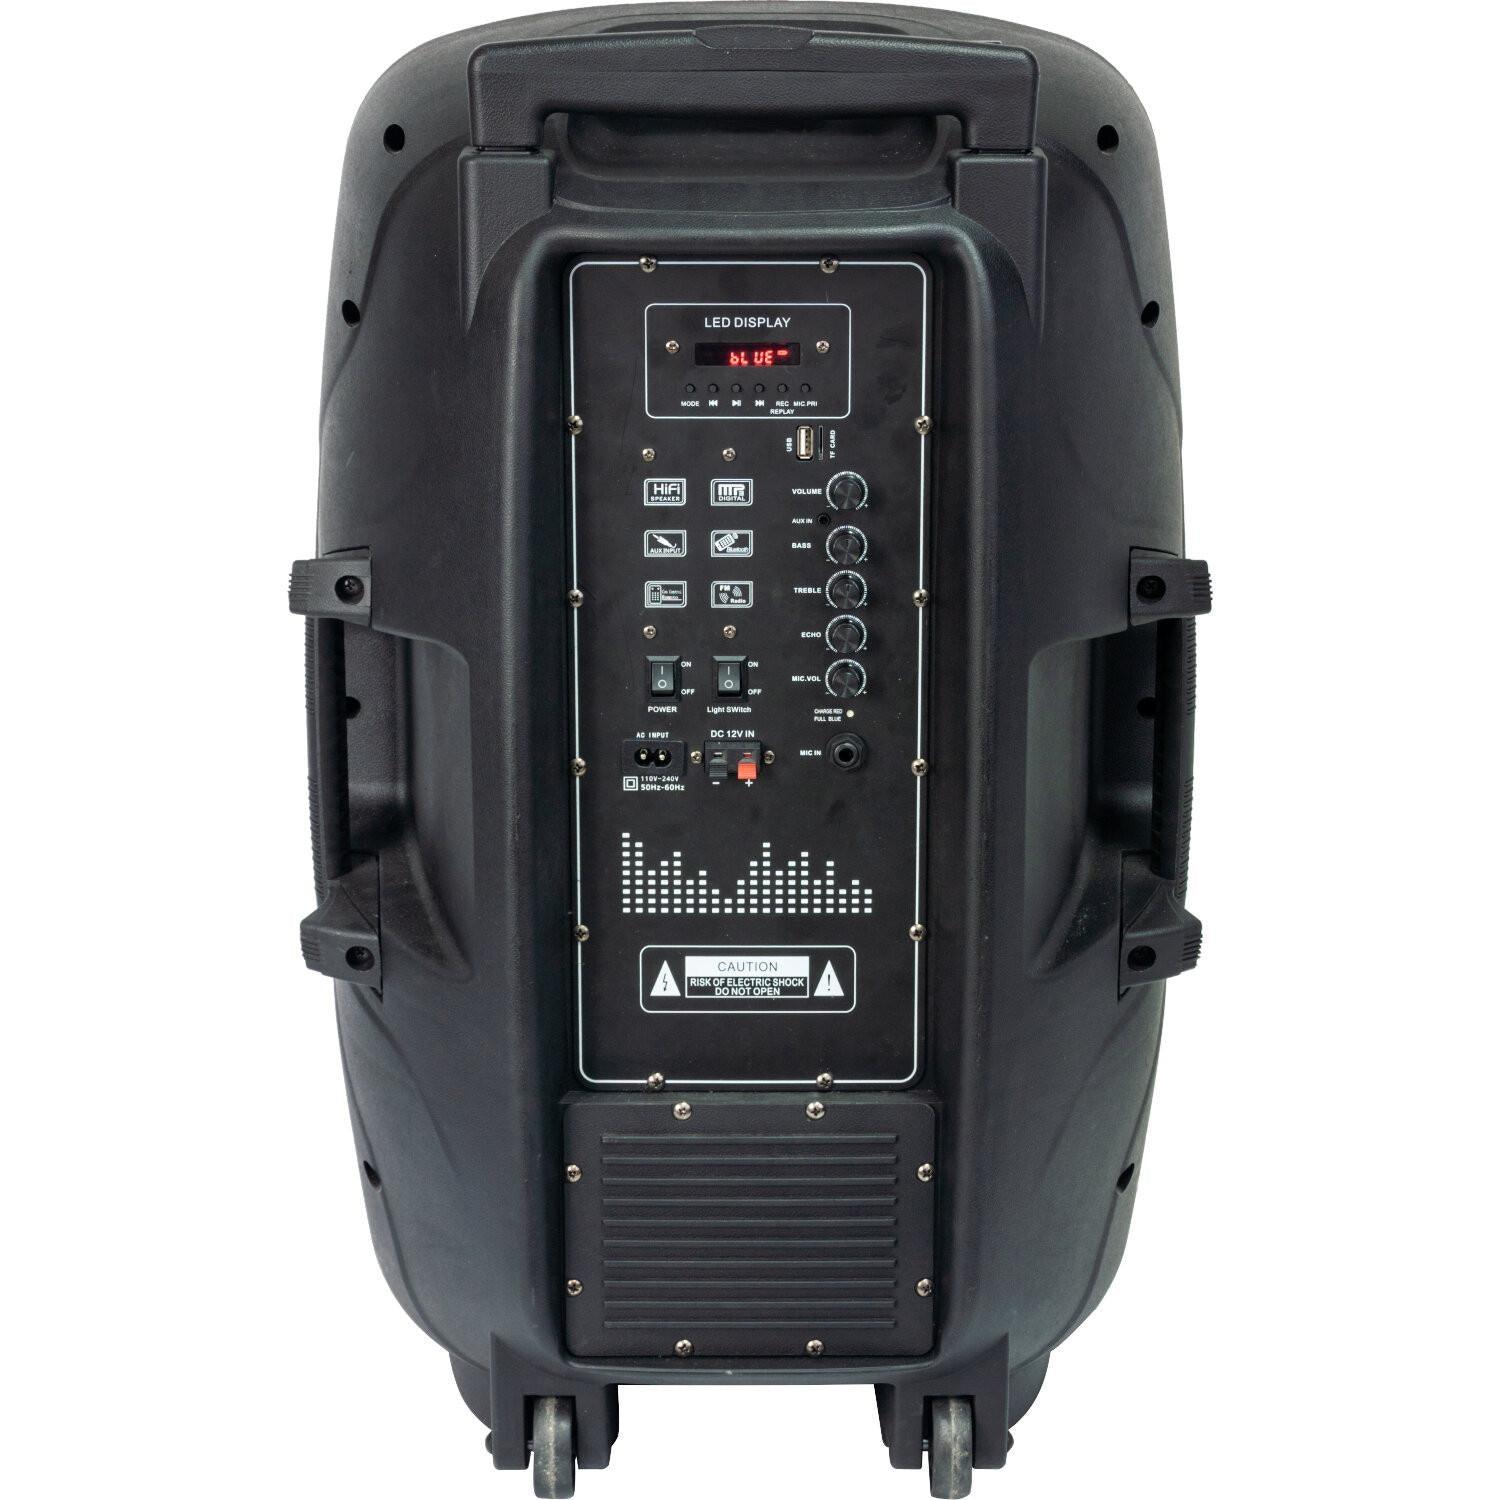 PLS PARTY-210LED 10" Portable PA System with Bluetooth, Remote - DY Pro Audio